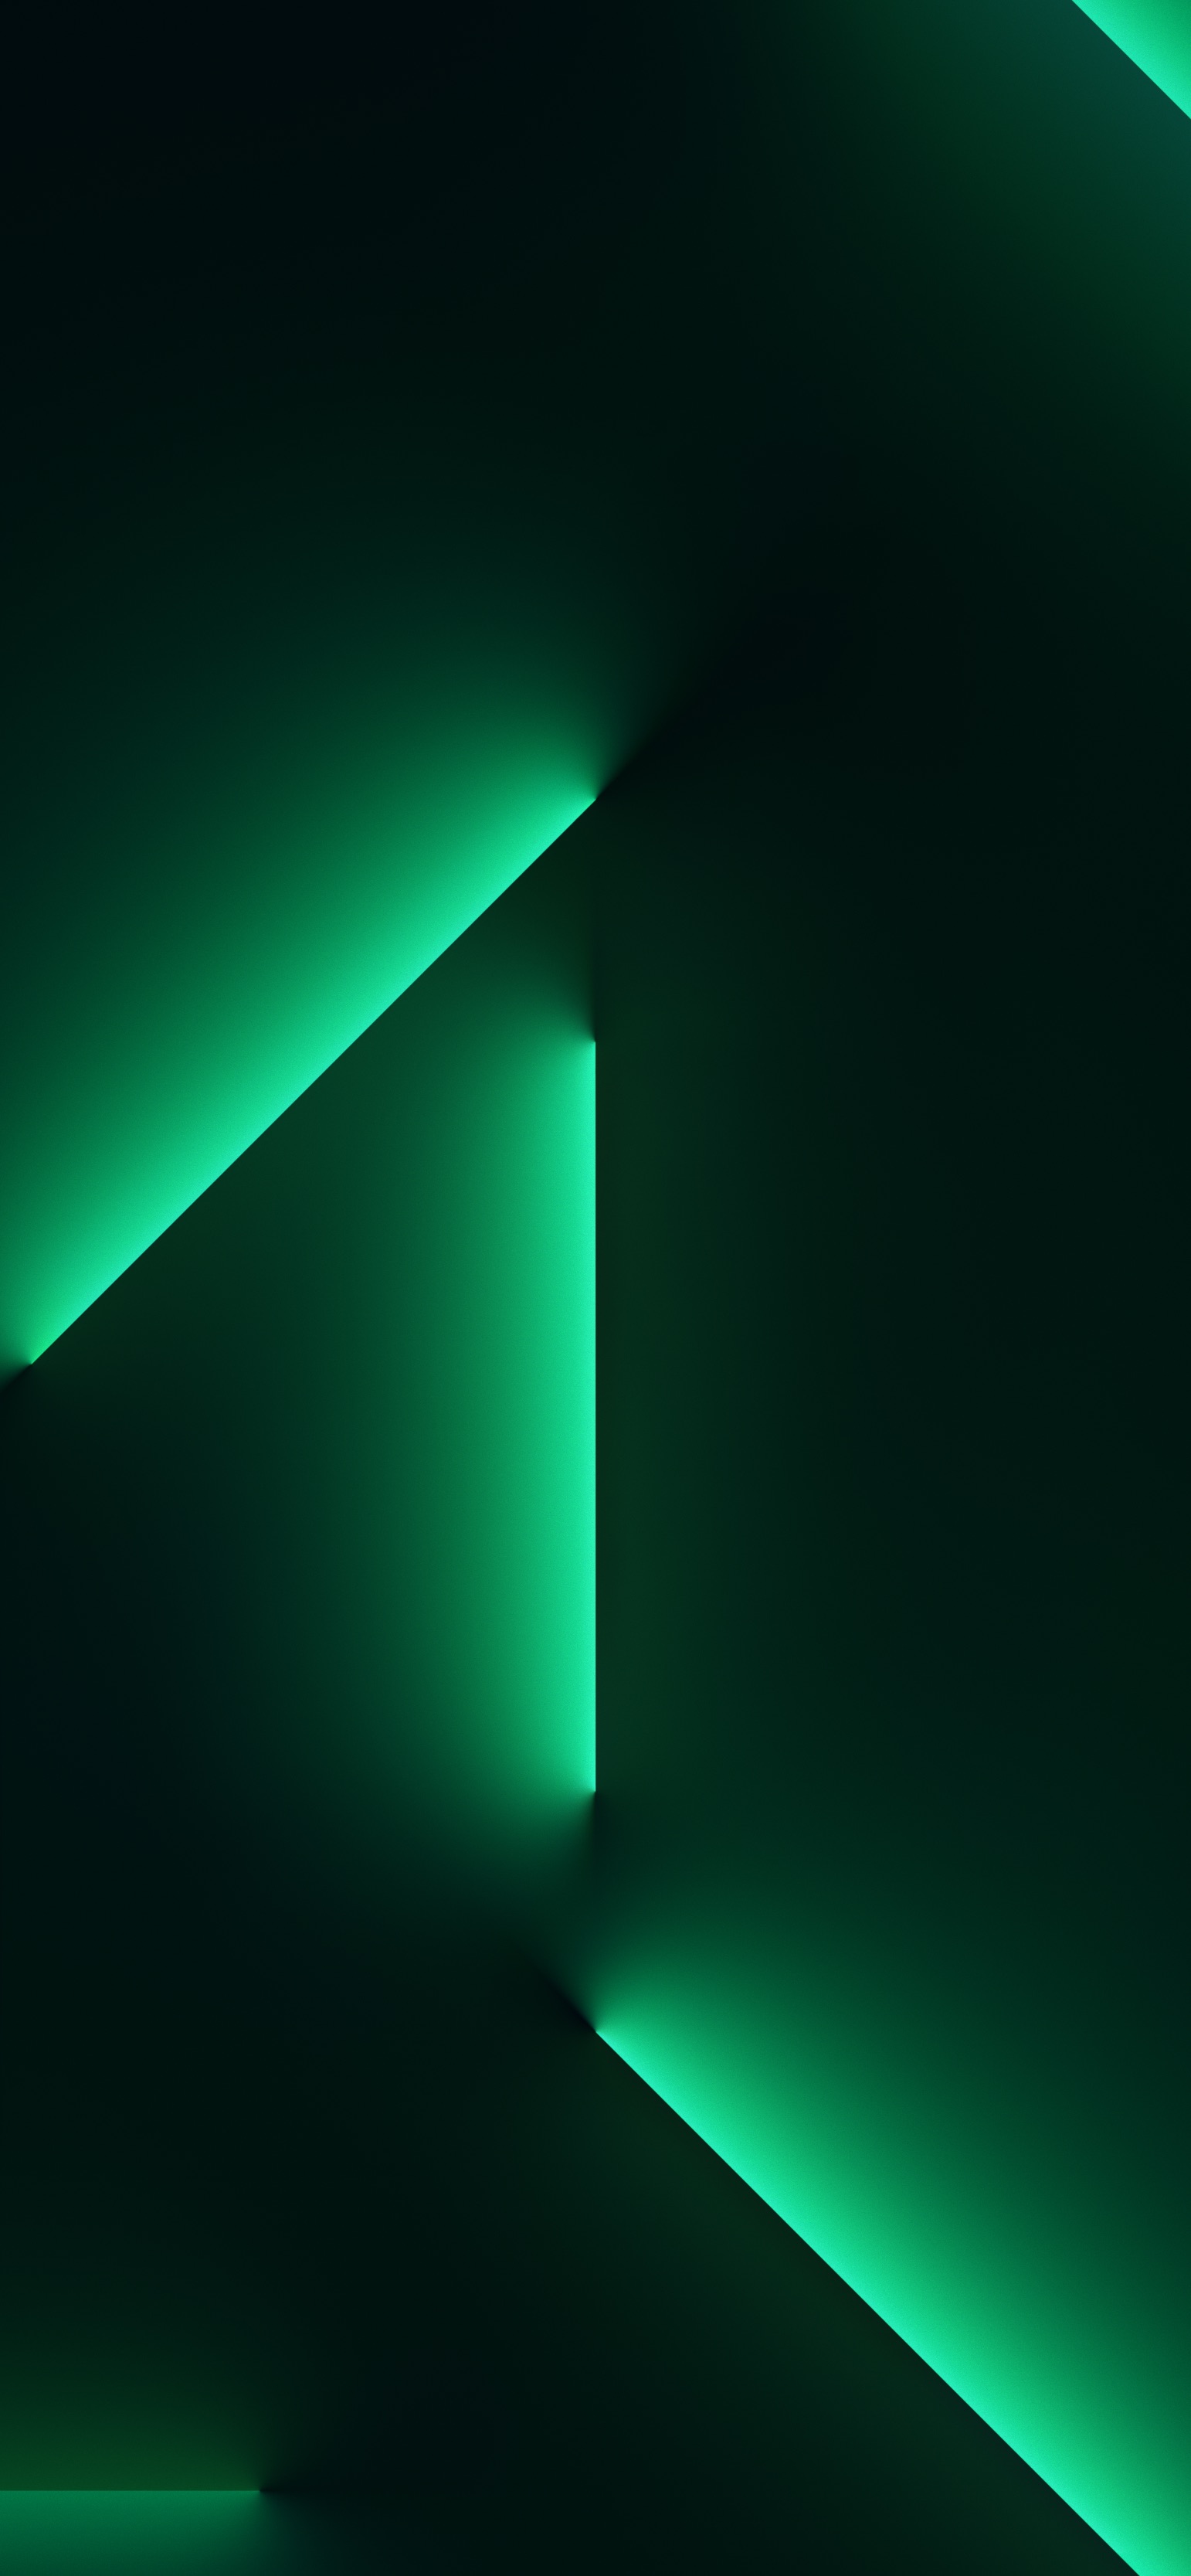 Download the new green iPhone 13 wallpaper right here